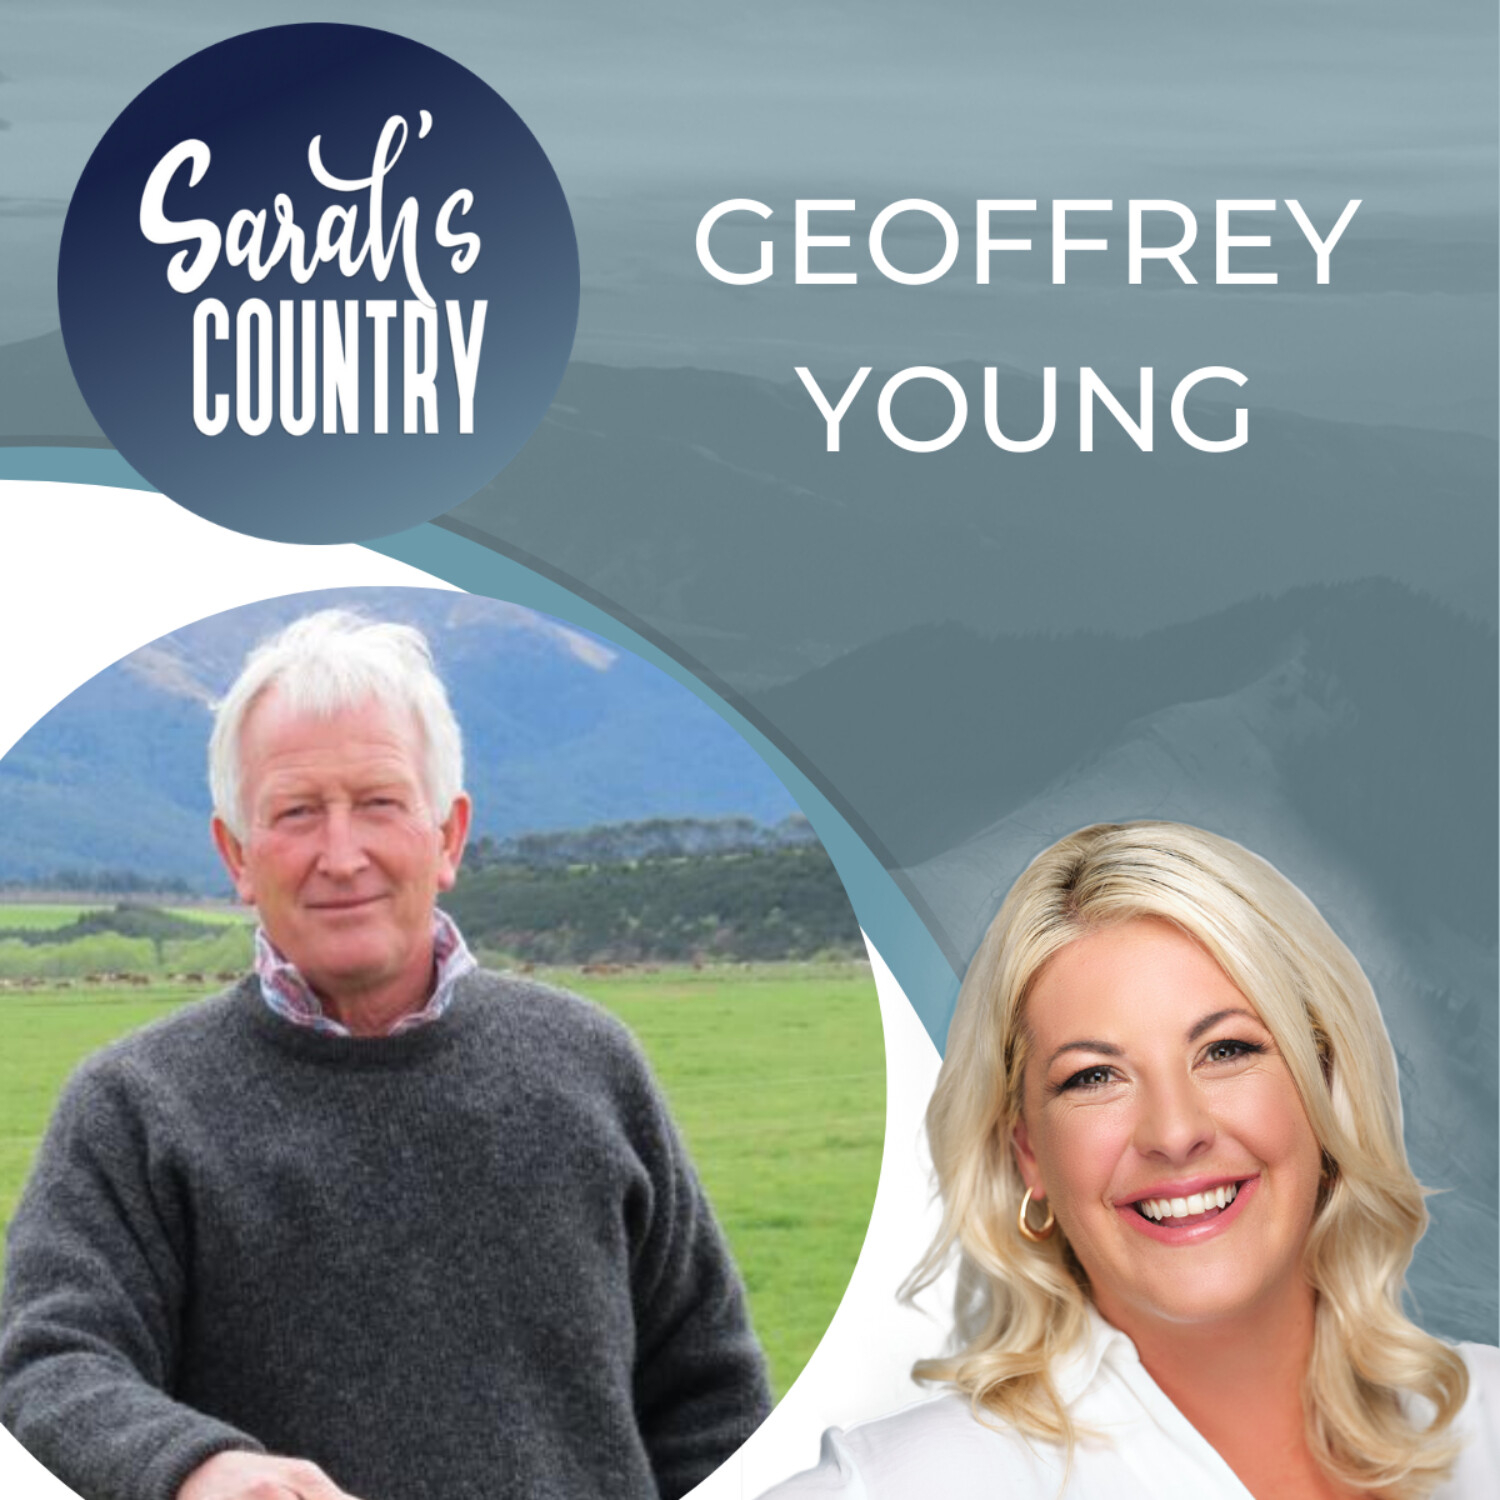 “Southland event to thank farmers and show unity” with Geoffrey Young